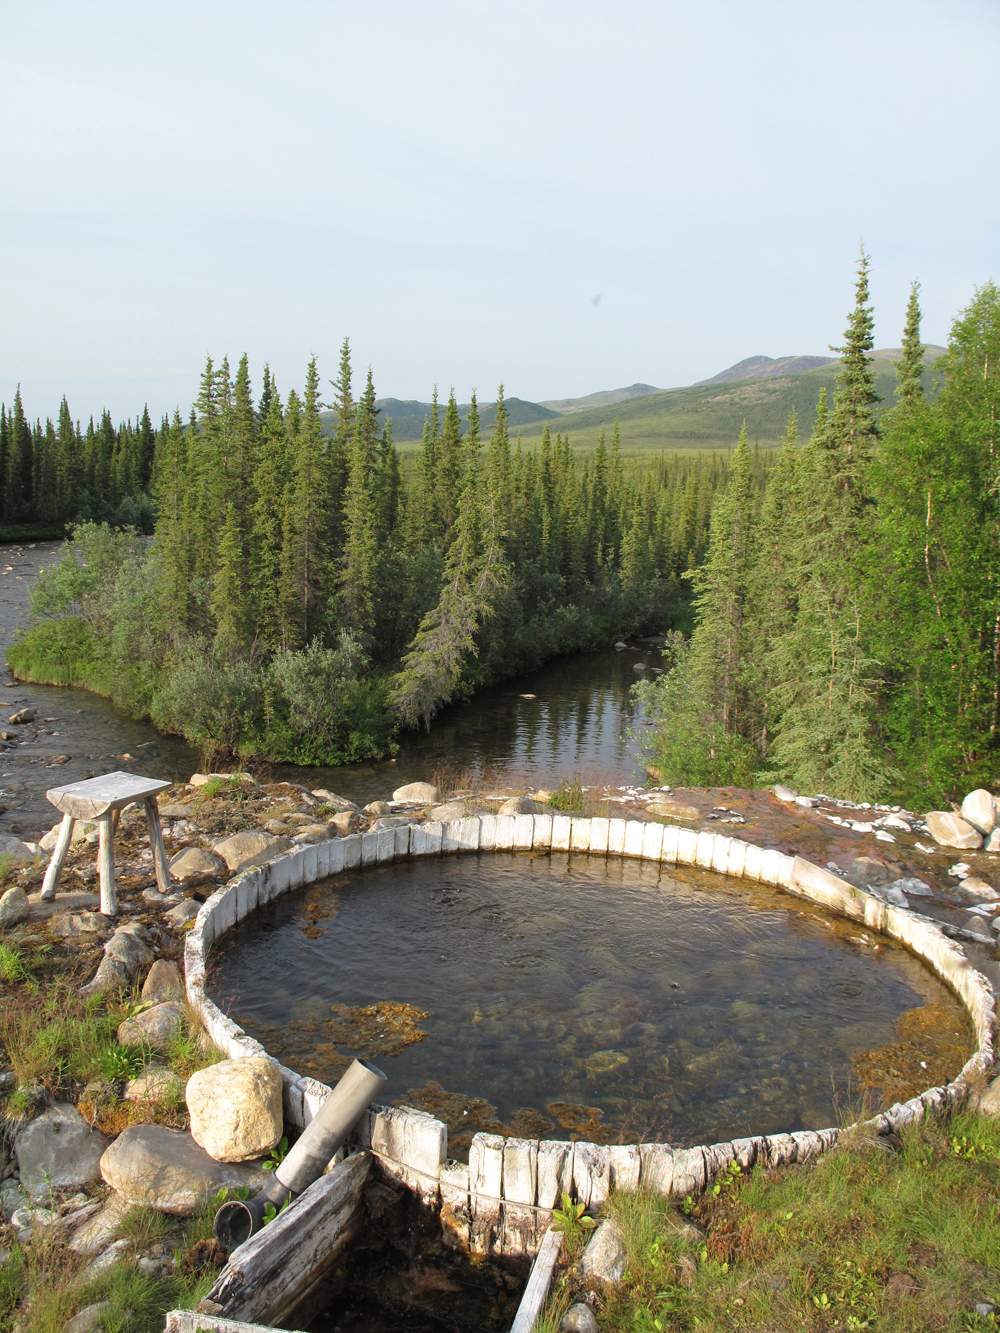 A pool of water hemmed in by a circle of upright boards overlooks a shallow clear river flowing through a spruce forest with tundra-covered hills in the background.